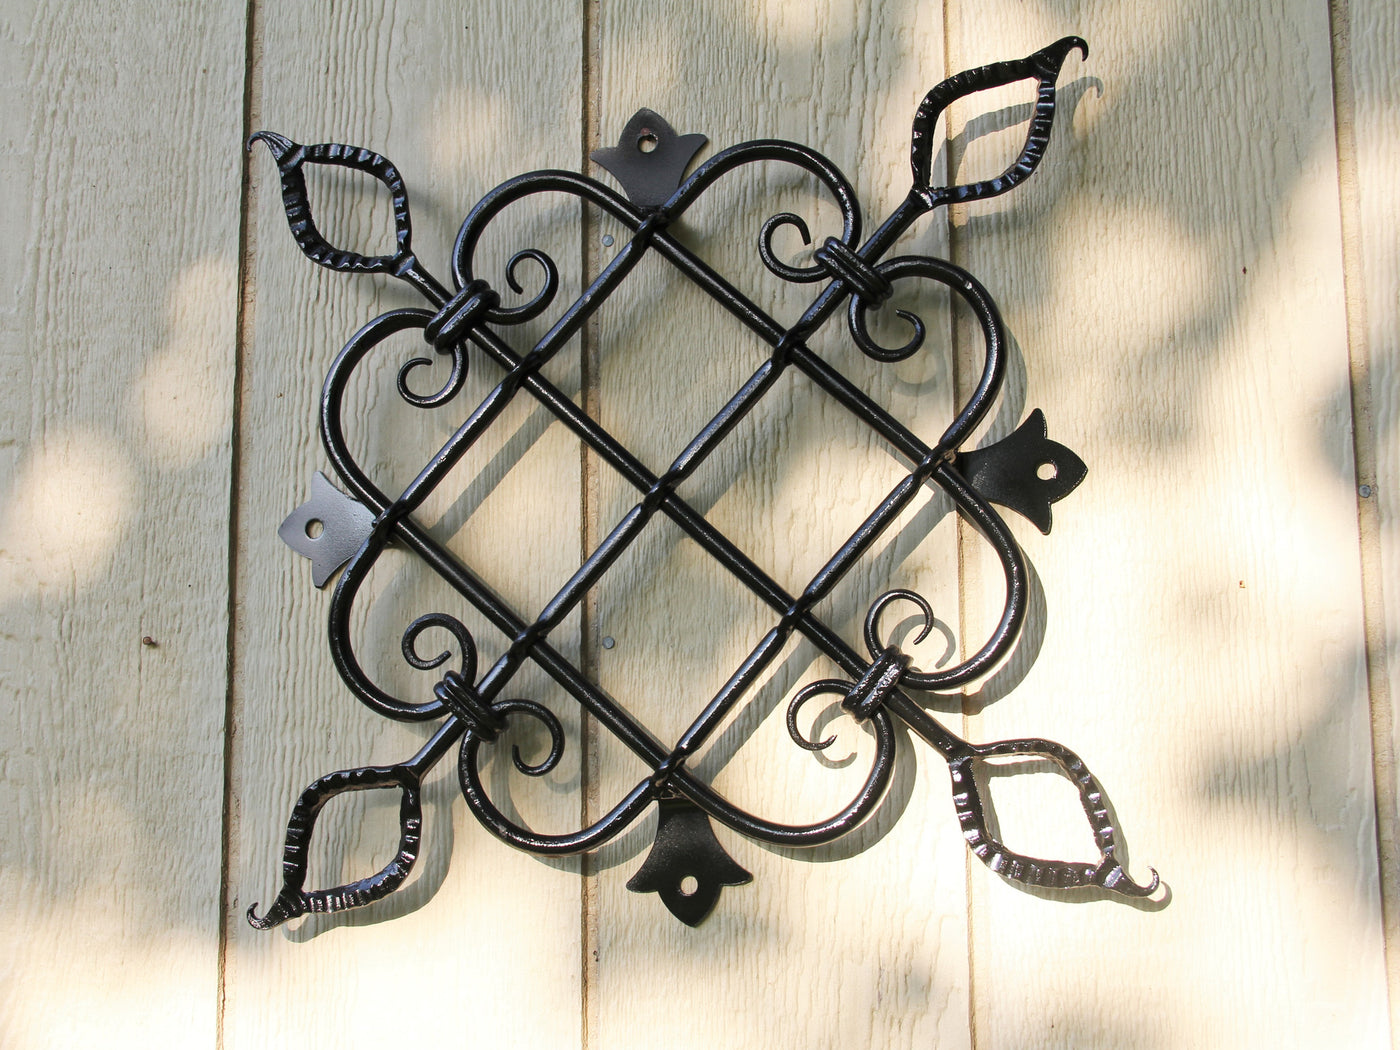 Large Scrolled Steel Panel - Madison Iron and Wood - Gate Window - metal outdoor decor - Steel deocrations - american made products - veteran owned business products - fencing decorations - fencing supplies - custom wall decorations - personalized wall signs - steel - decorative post caps - steel post caps - metal post caps - brackets - structural brackets - home improvement - easter - easter decorations - easter gift - easter yard decor